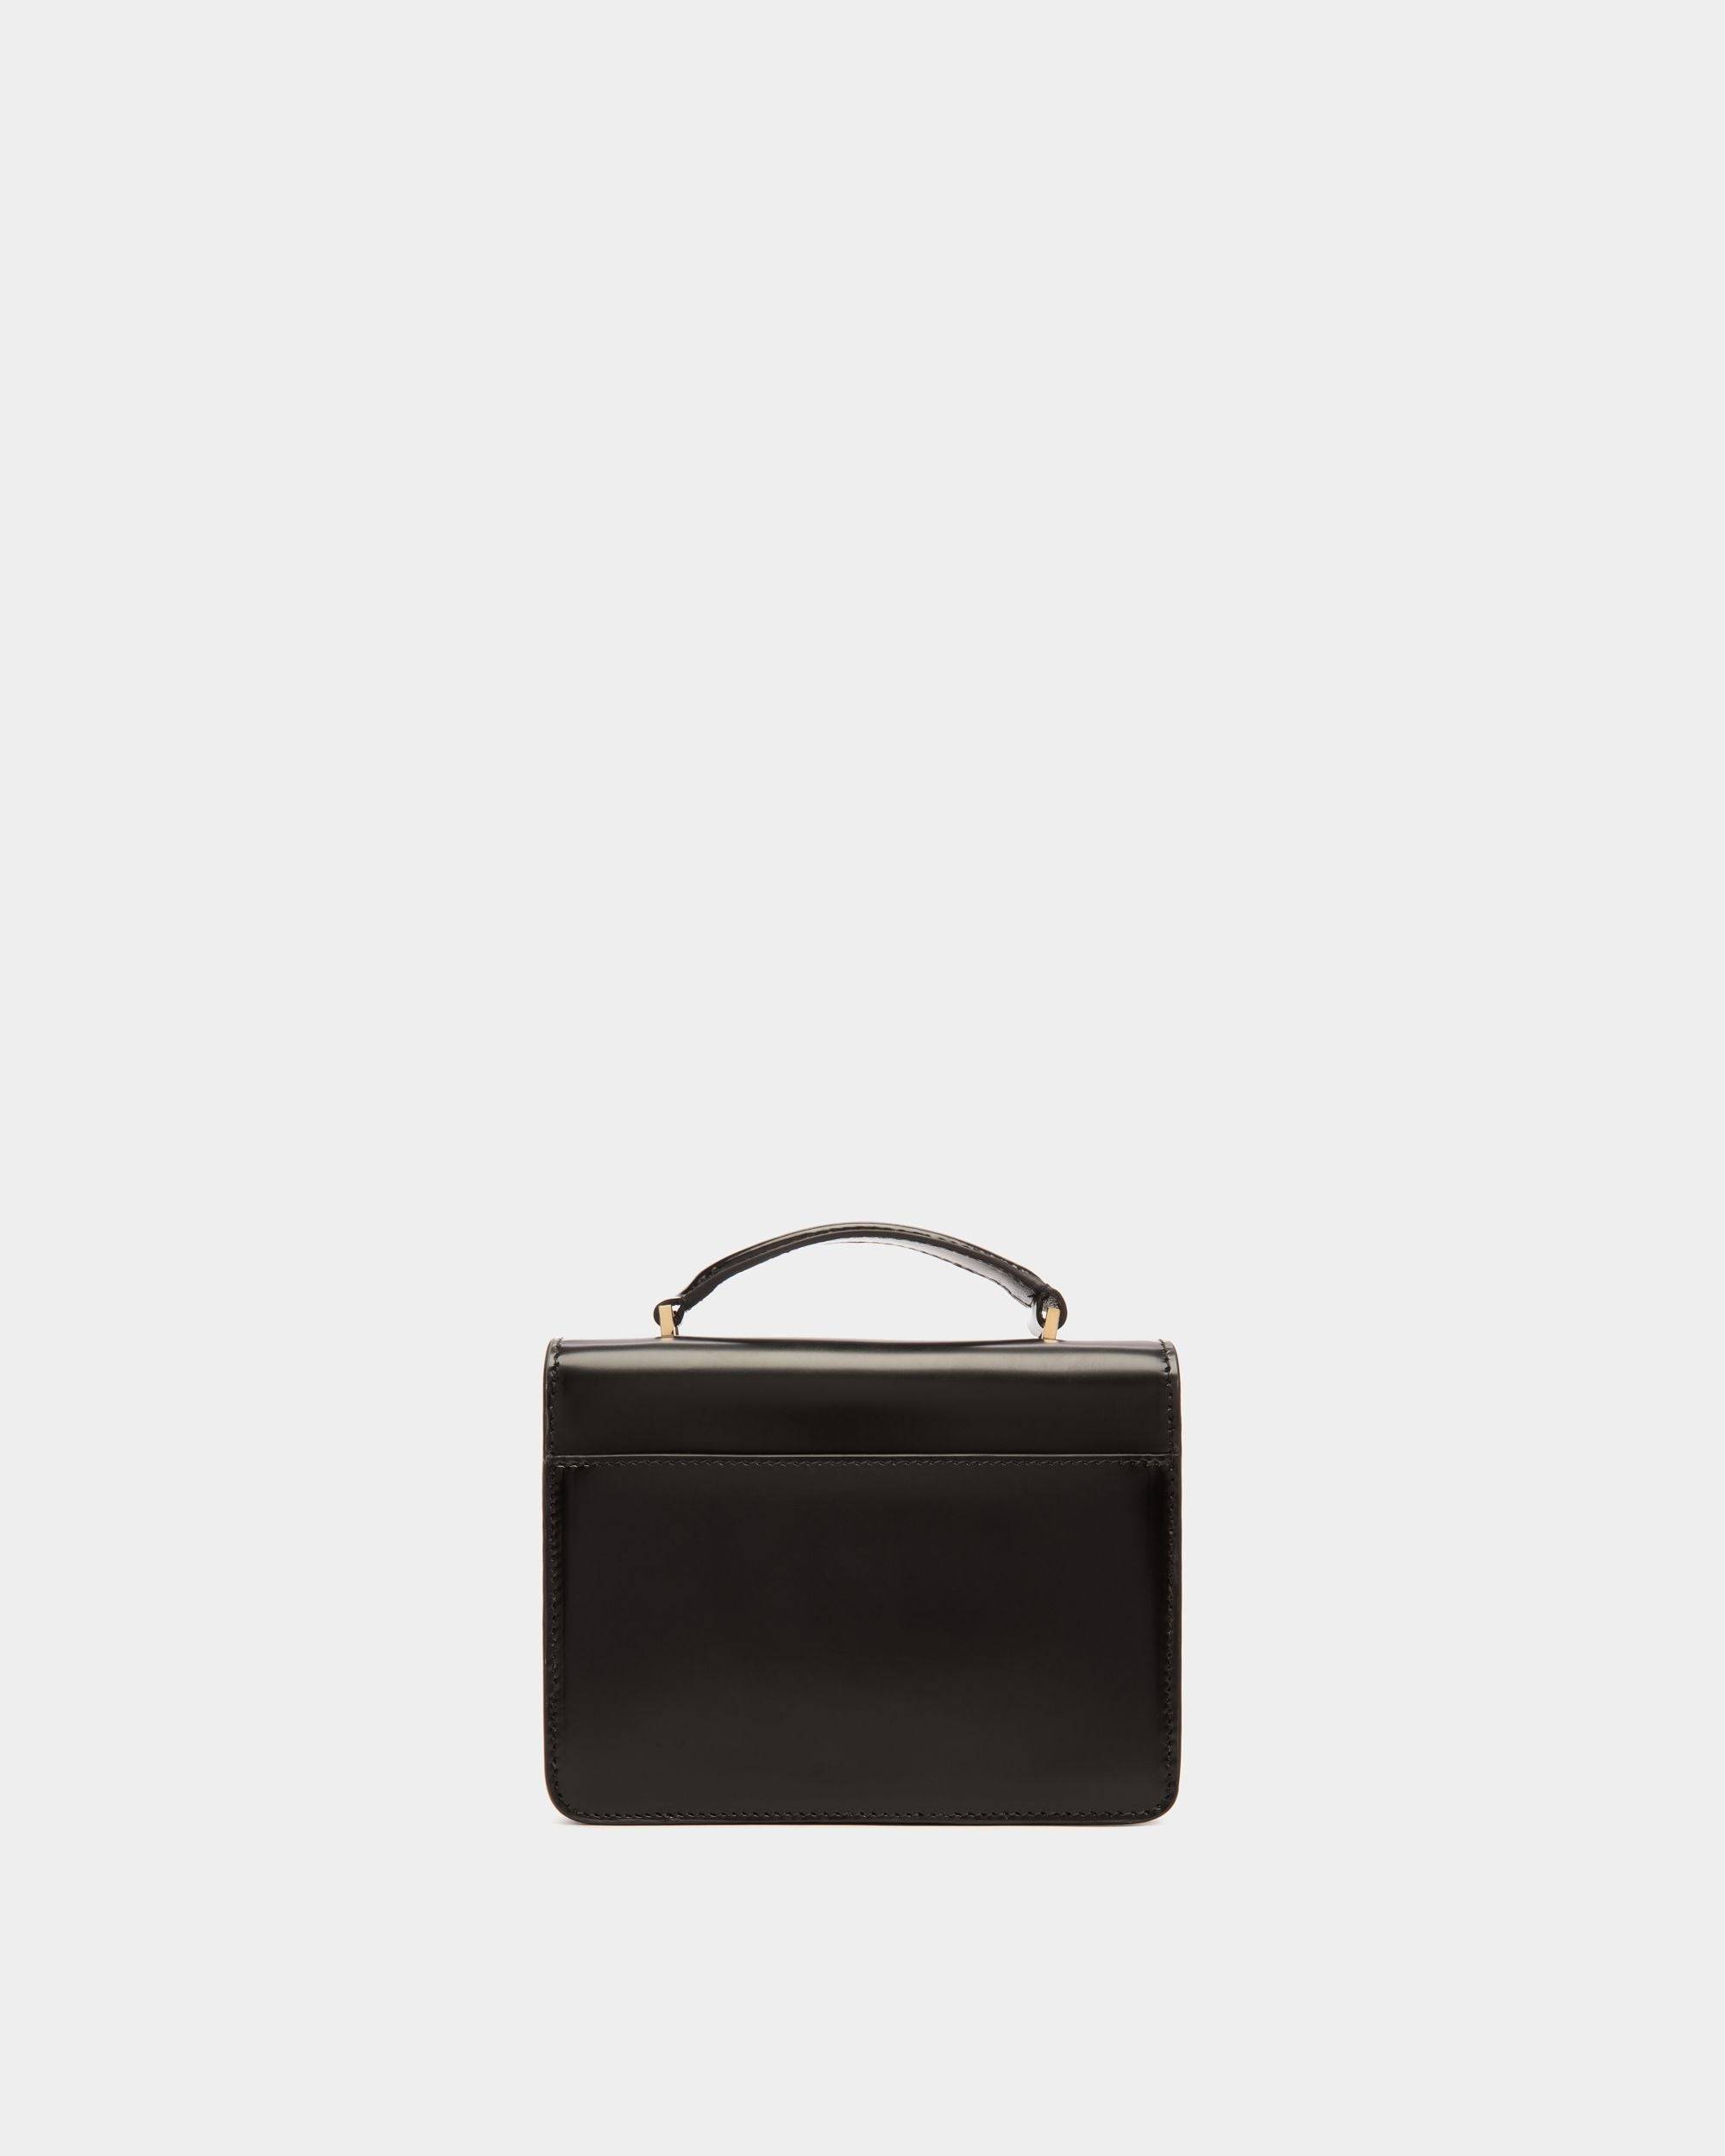 Ollam | Women's Mini Top Handle Bag in Black Brushed Leather | Bally | Still Life Back